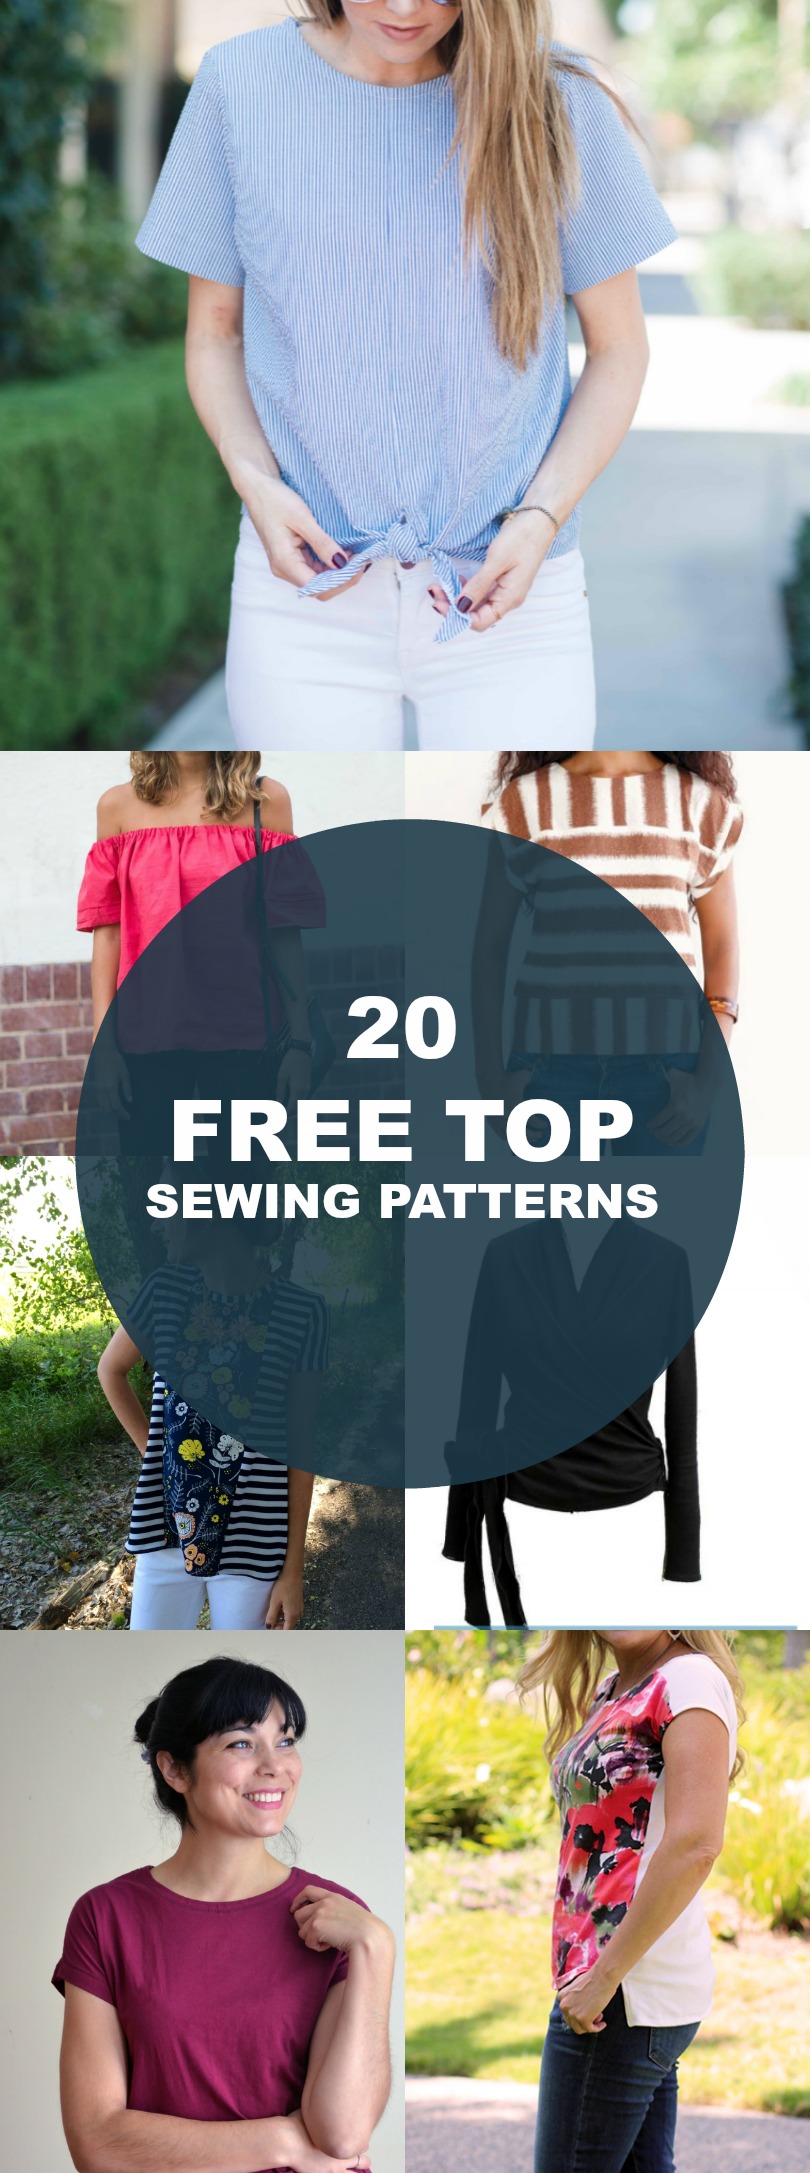 Free Sewing Patterns: 20 spring and summer tops and t-shirt tutorials